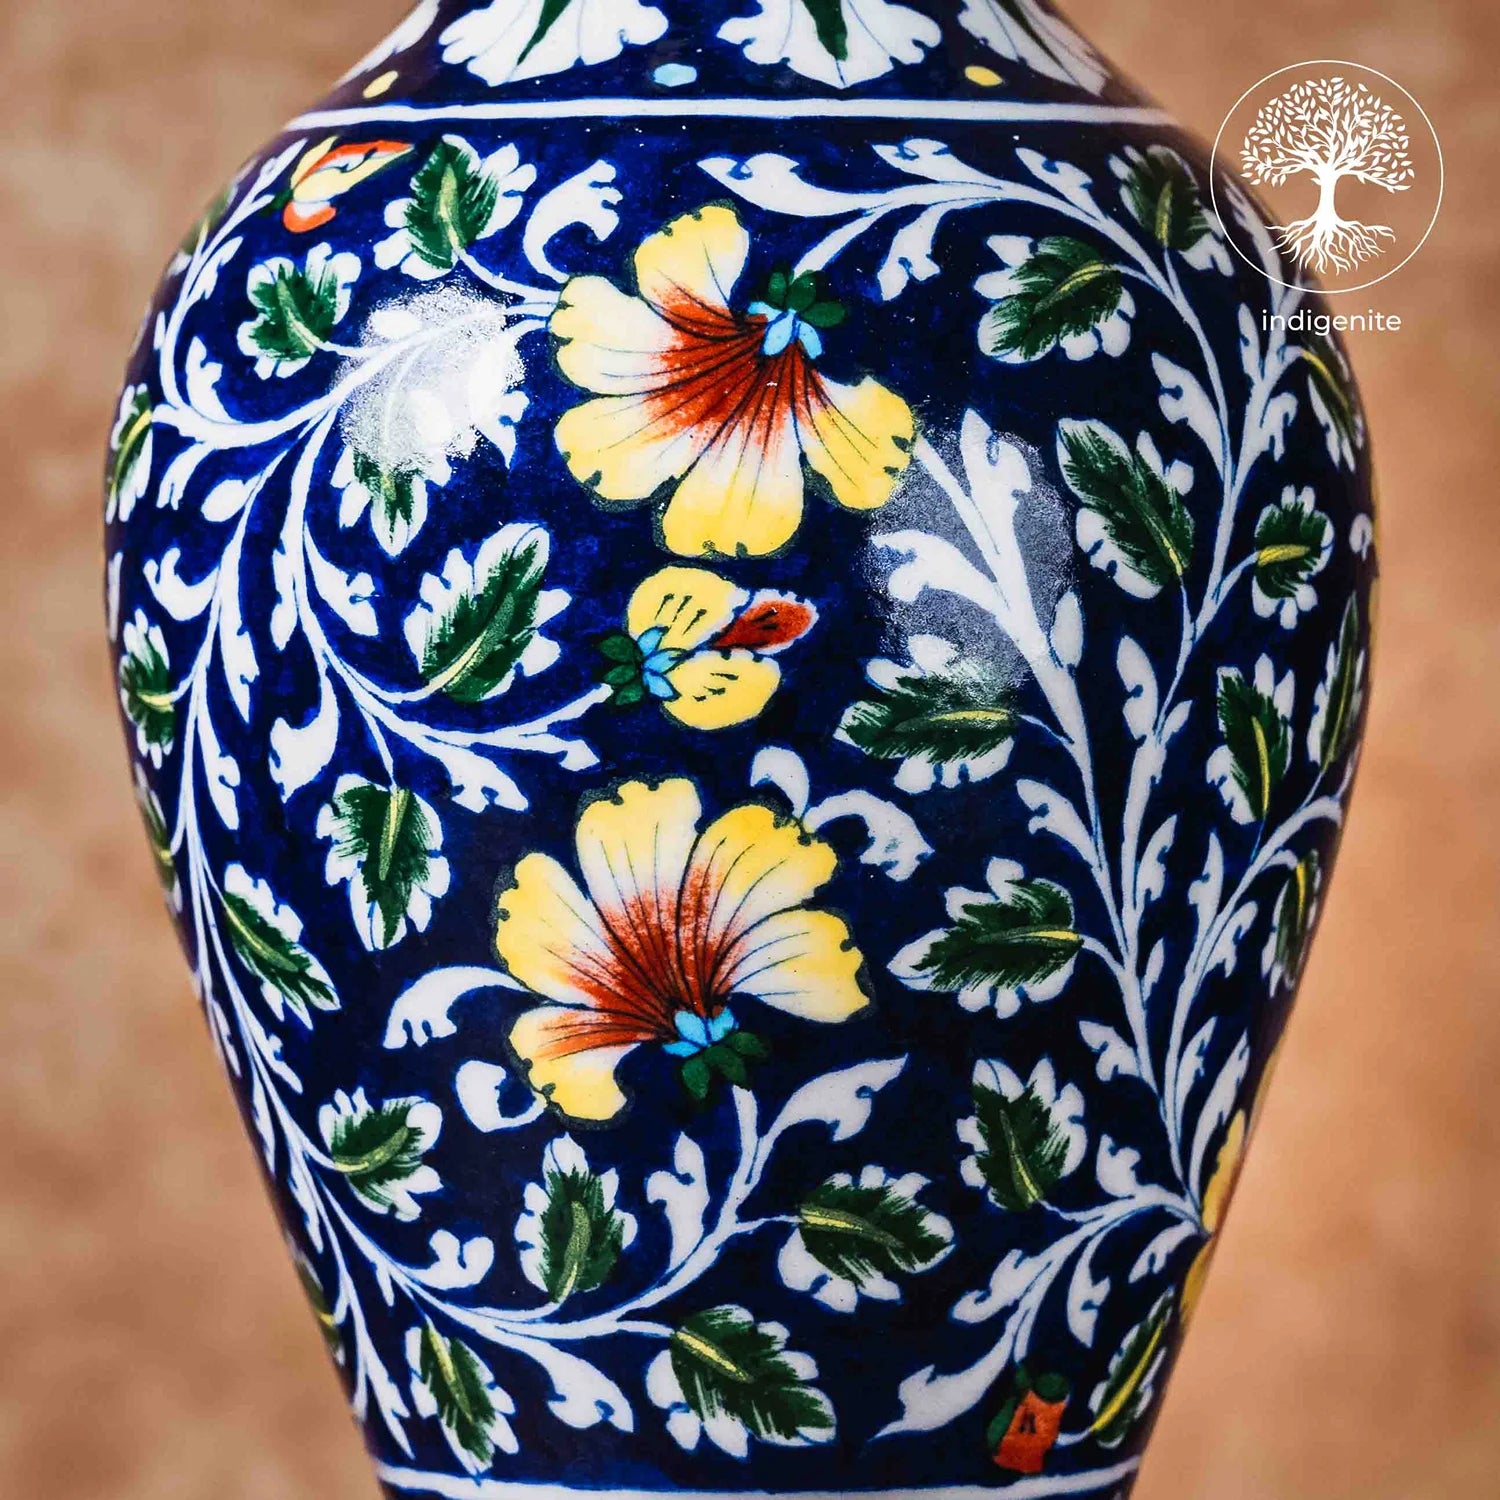 Midnight Blue and Colorful Floral Vase 11.5 Inch - Jaipur Blue Pottery